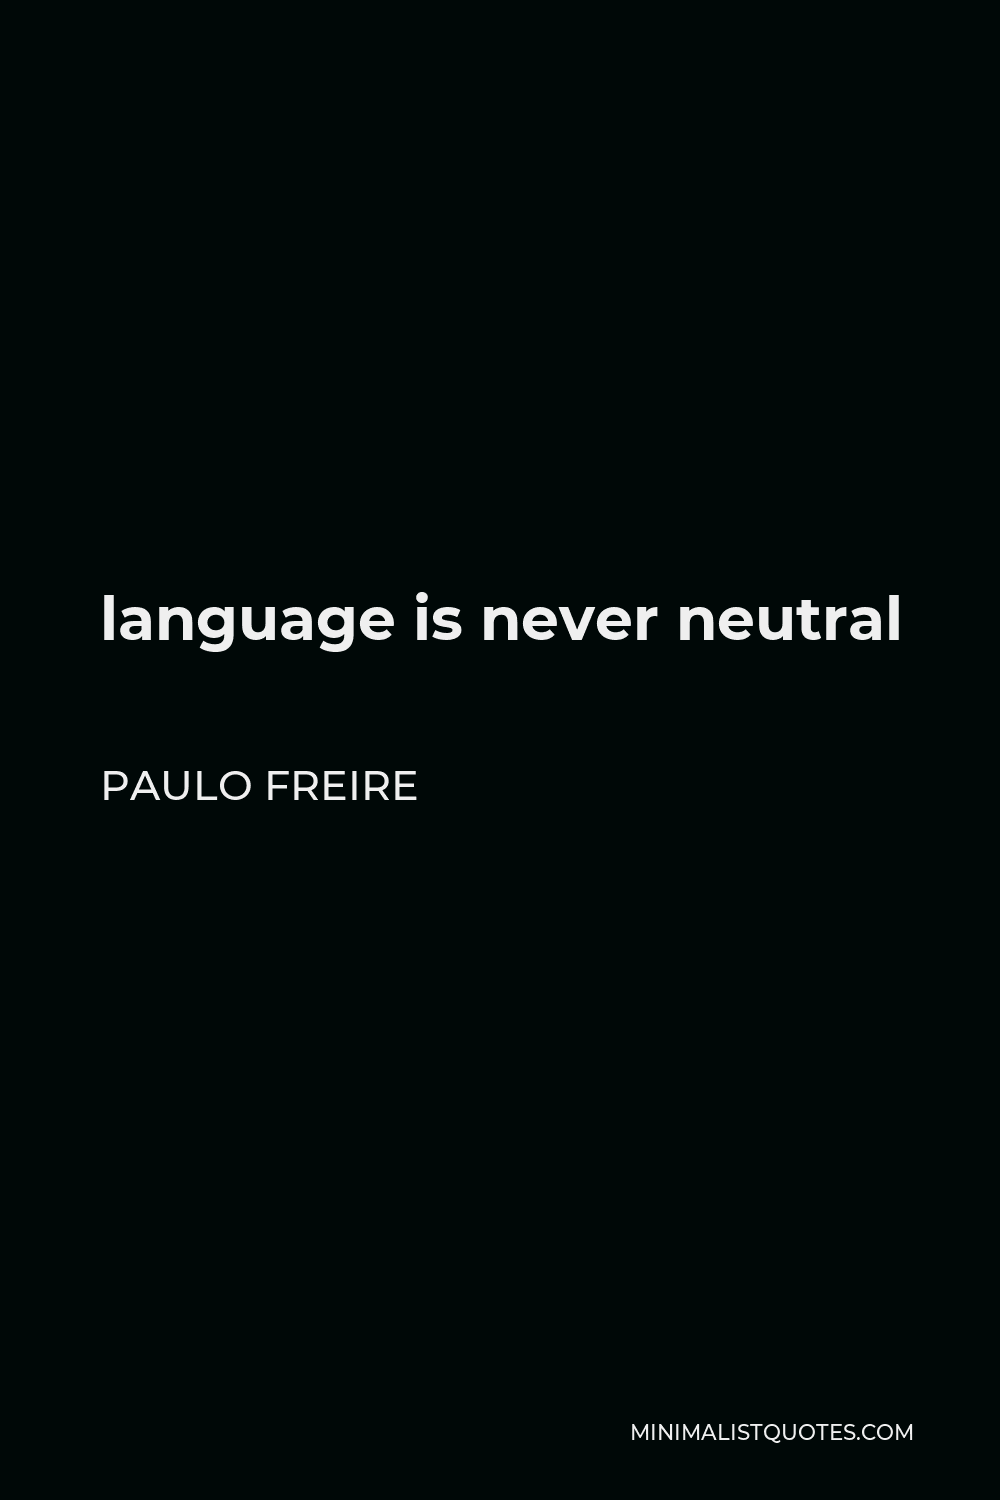 Paulo Freire Quote - language is never neutral